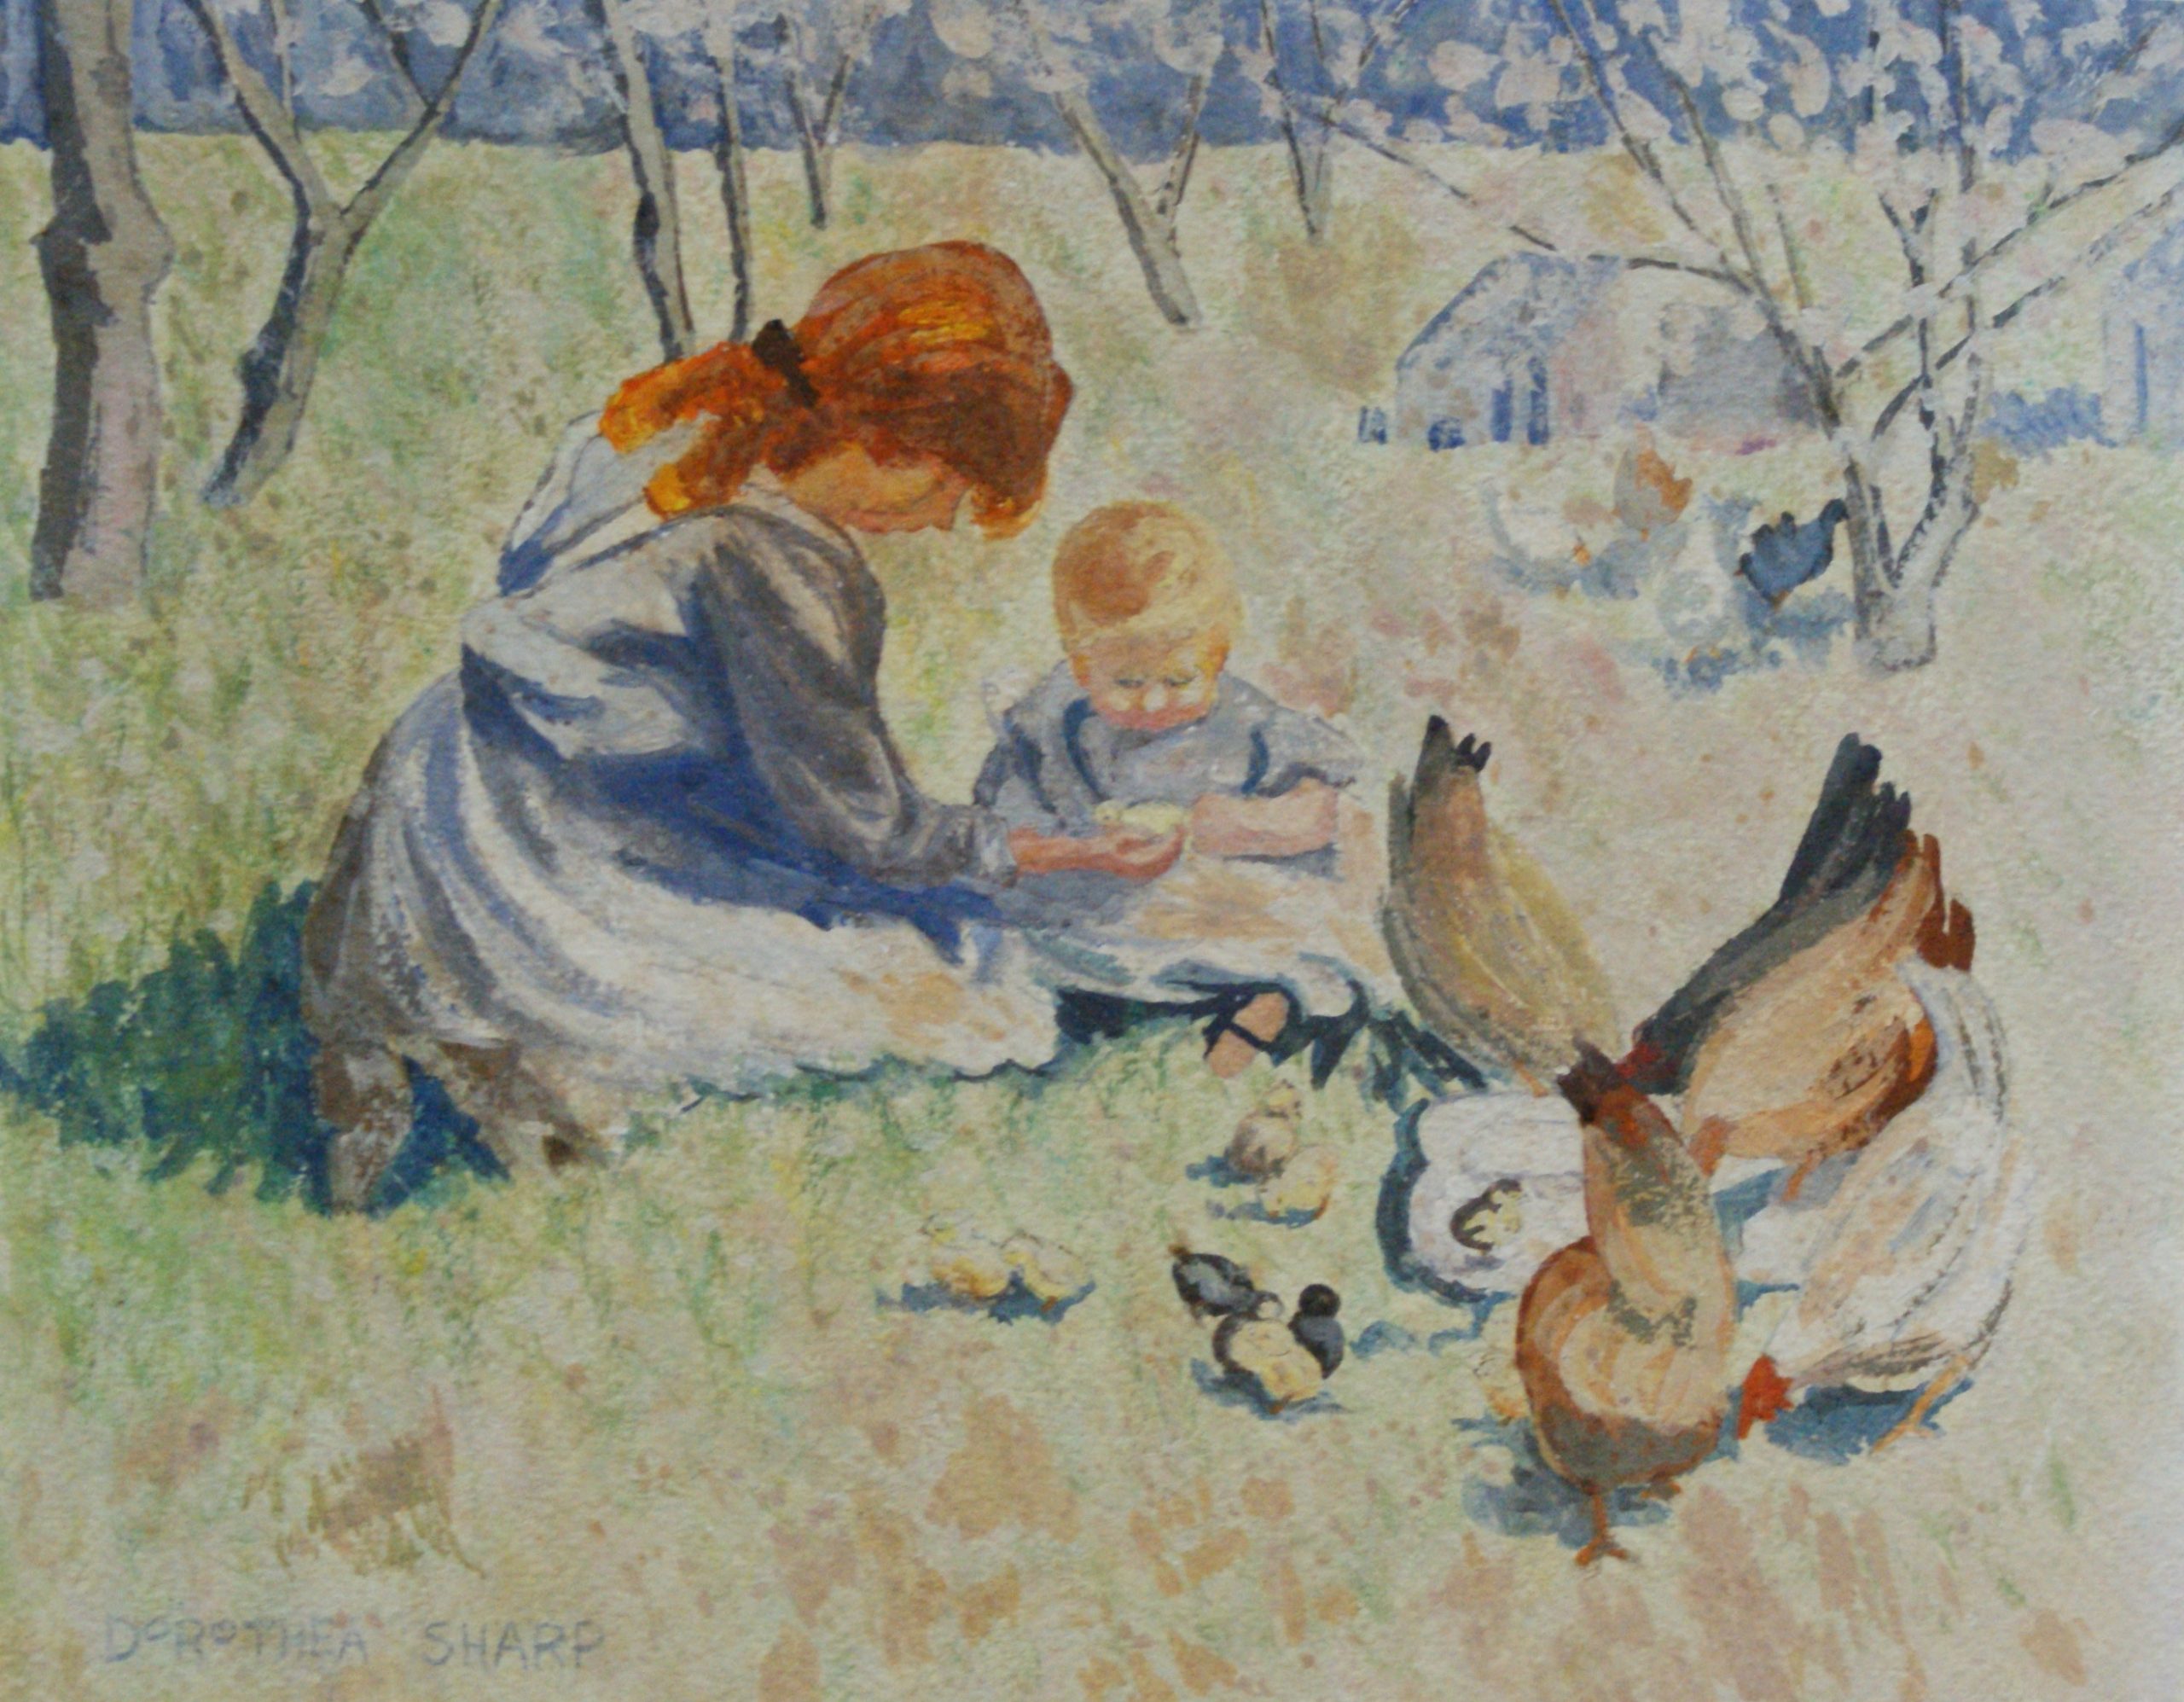 Dorothea Sharp- In the orchard